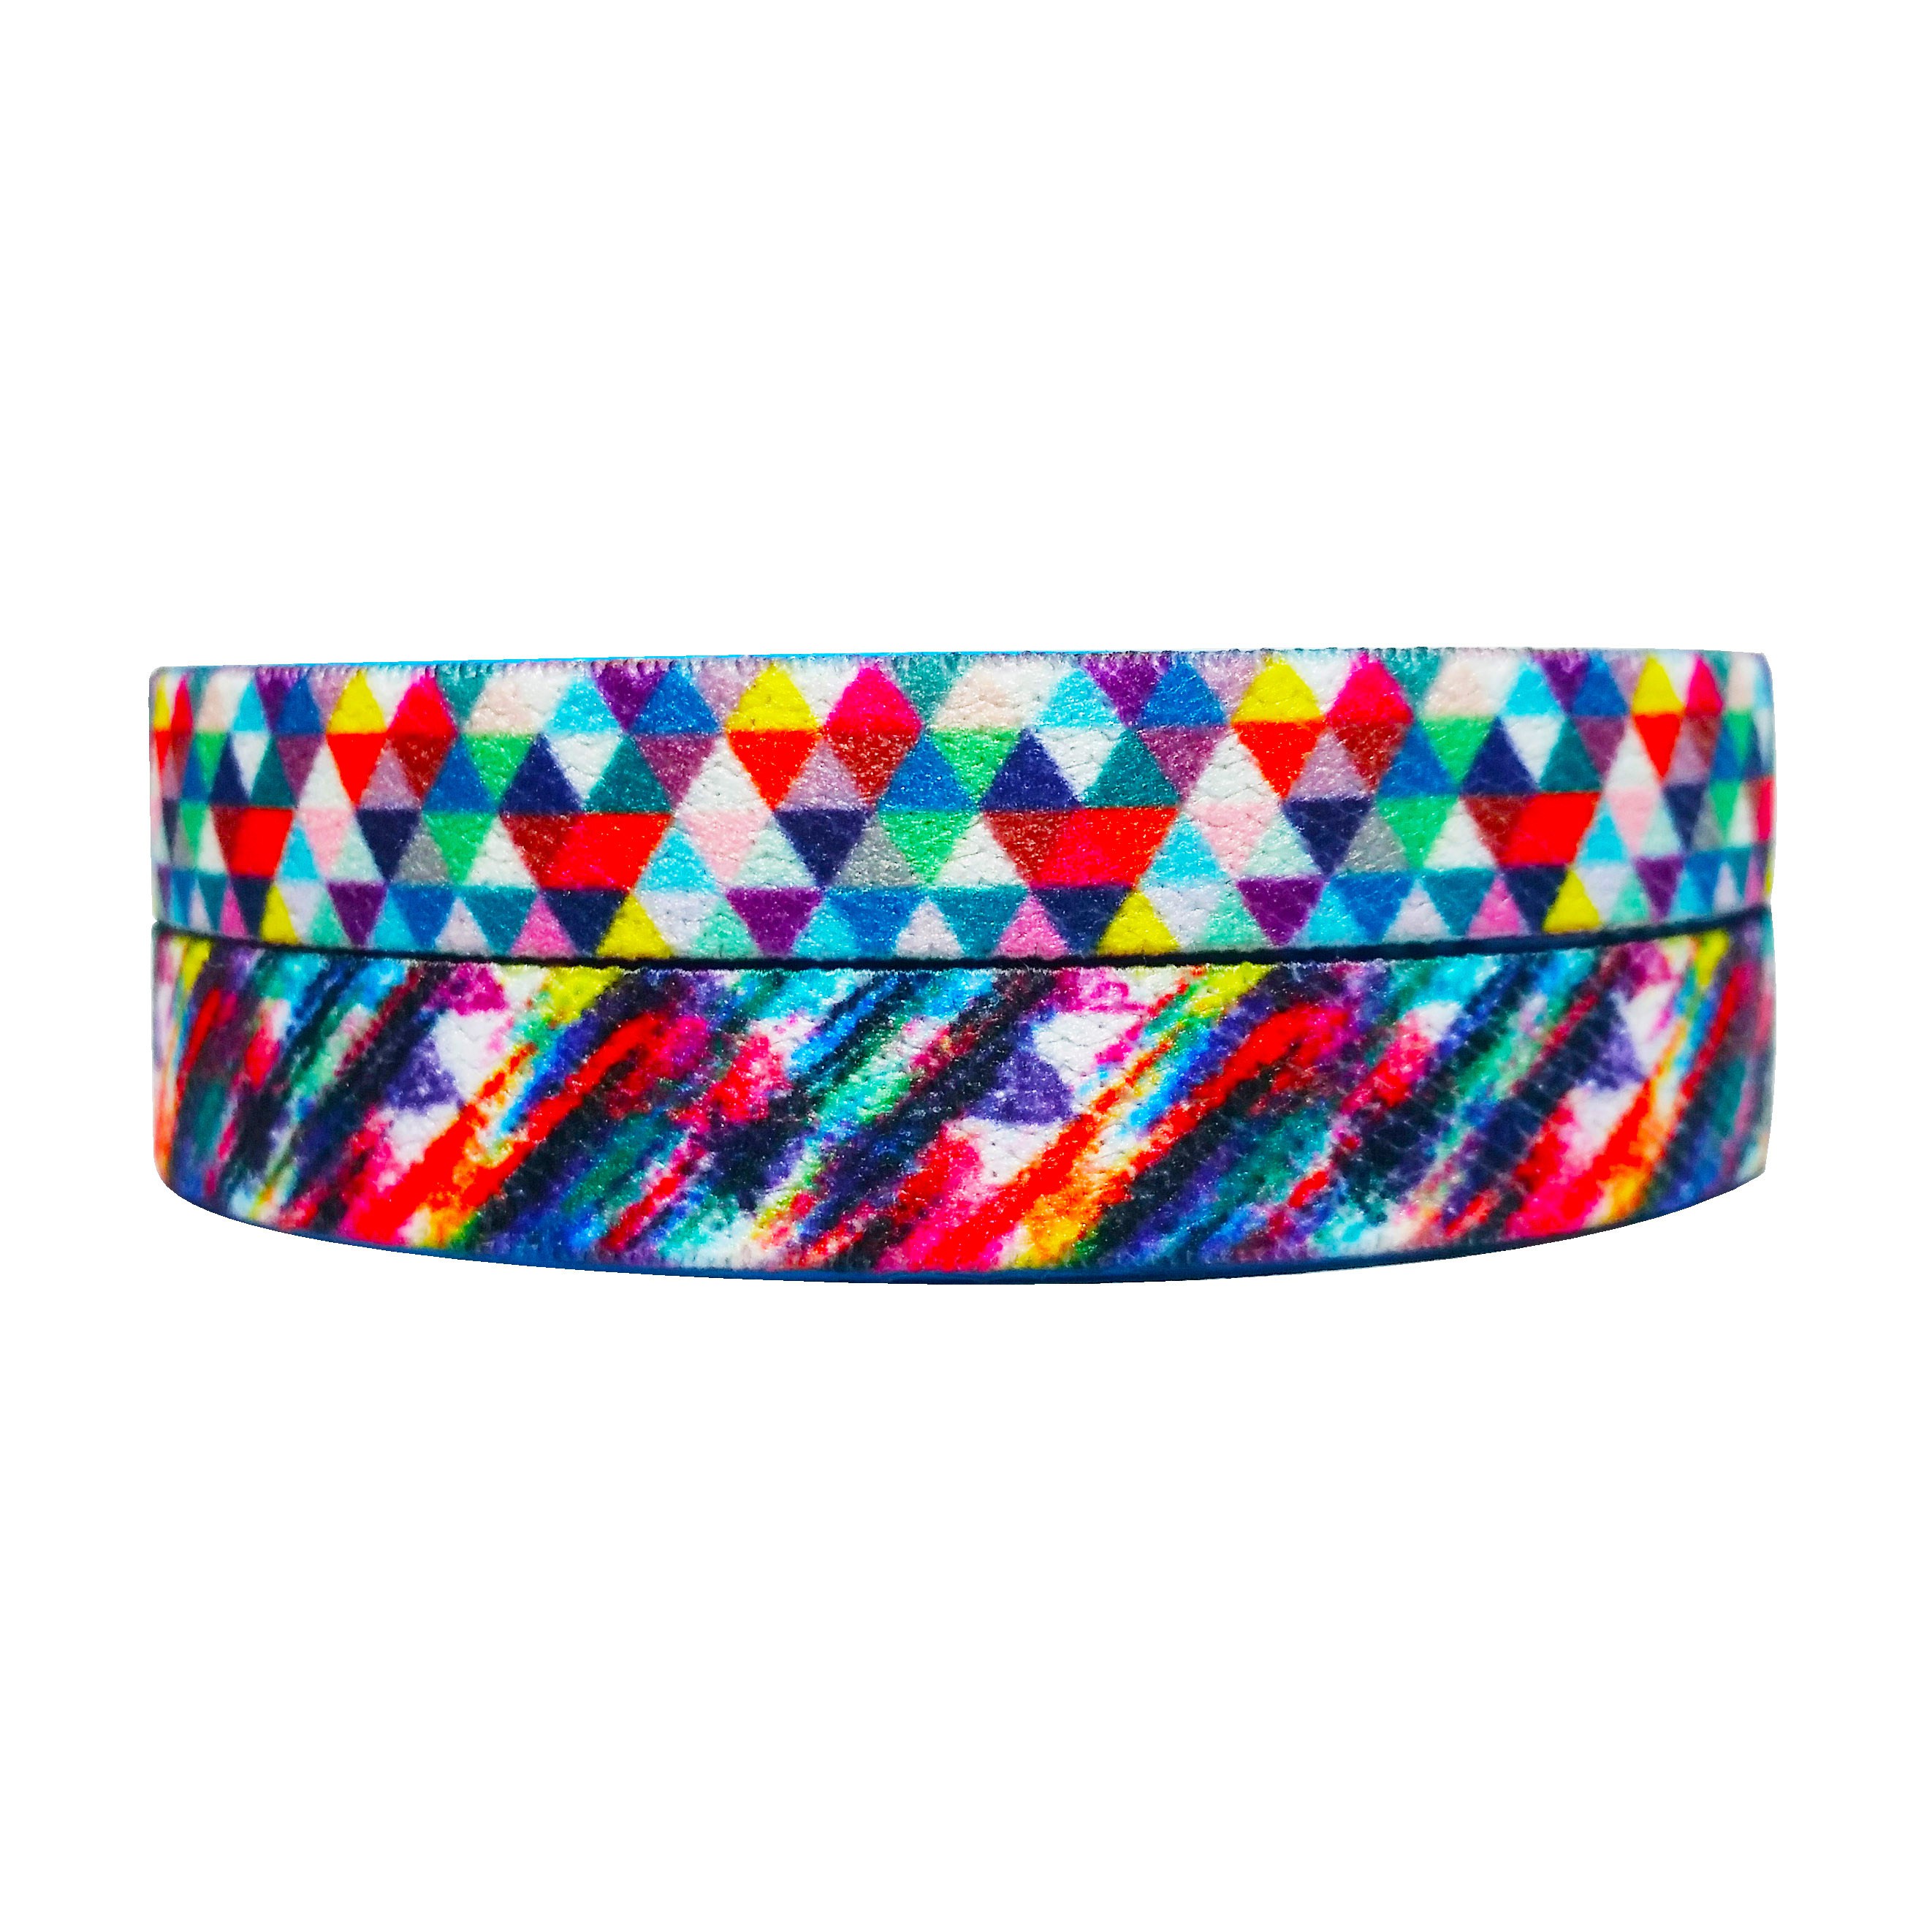 COLORFUL TRIANGLE - Christian Bracelets & Accessories | Bright Bands